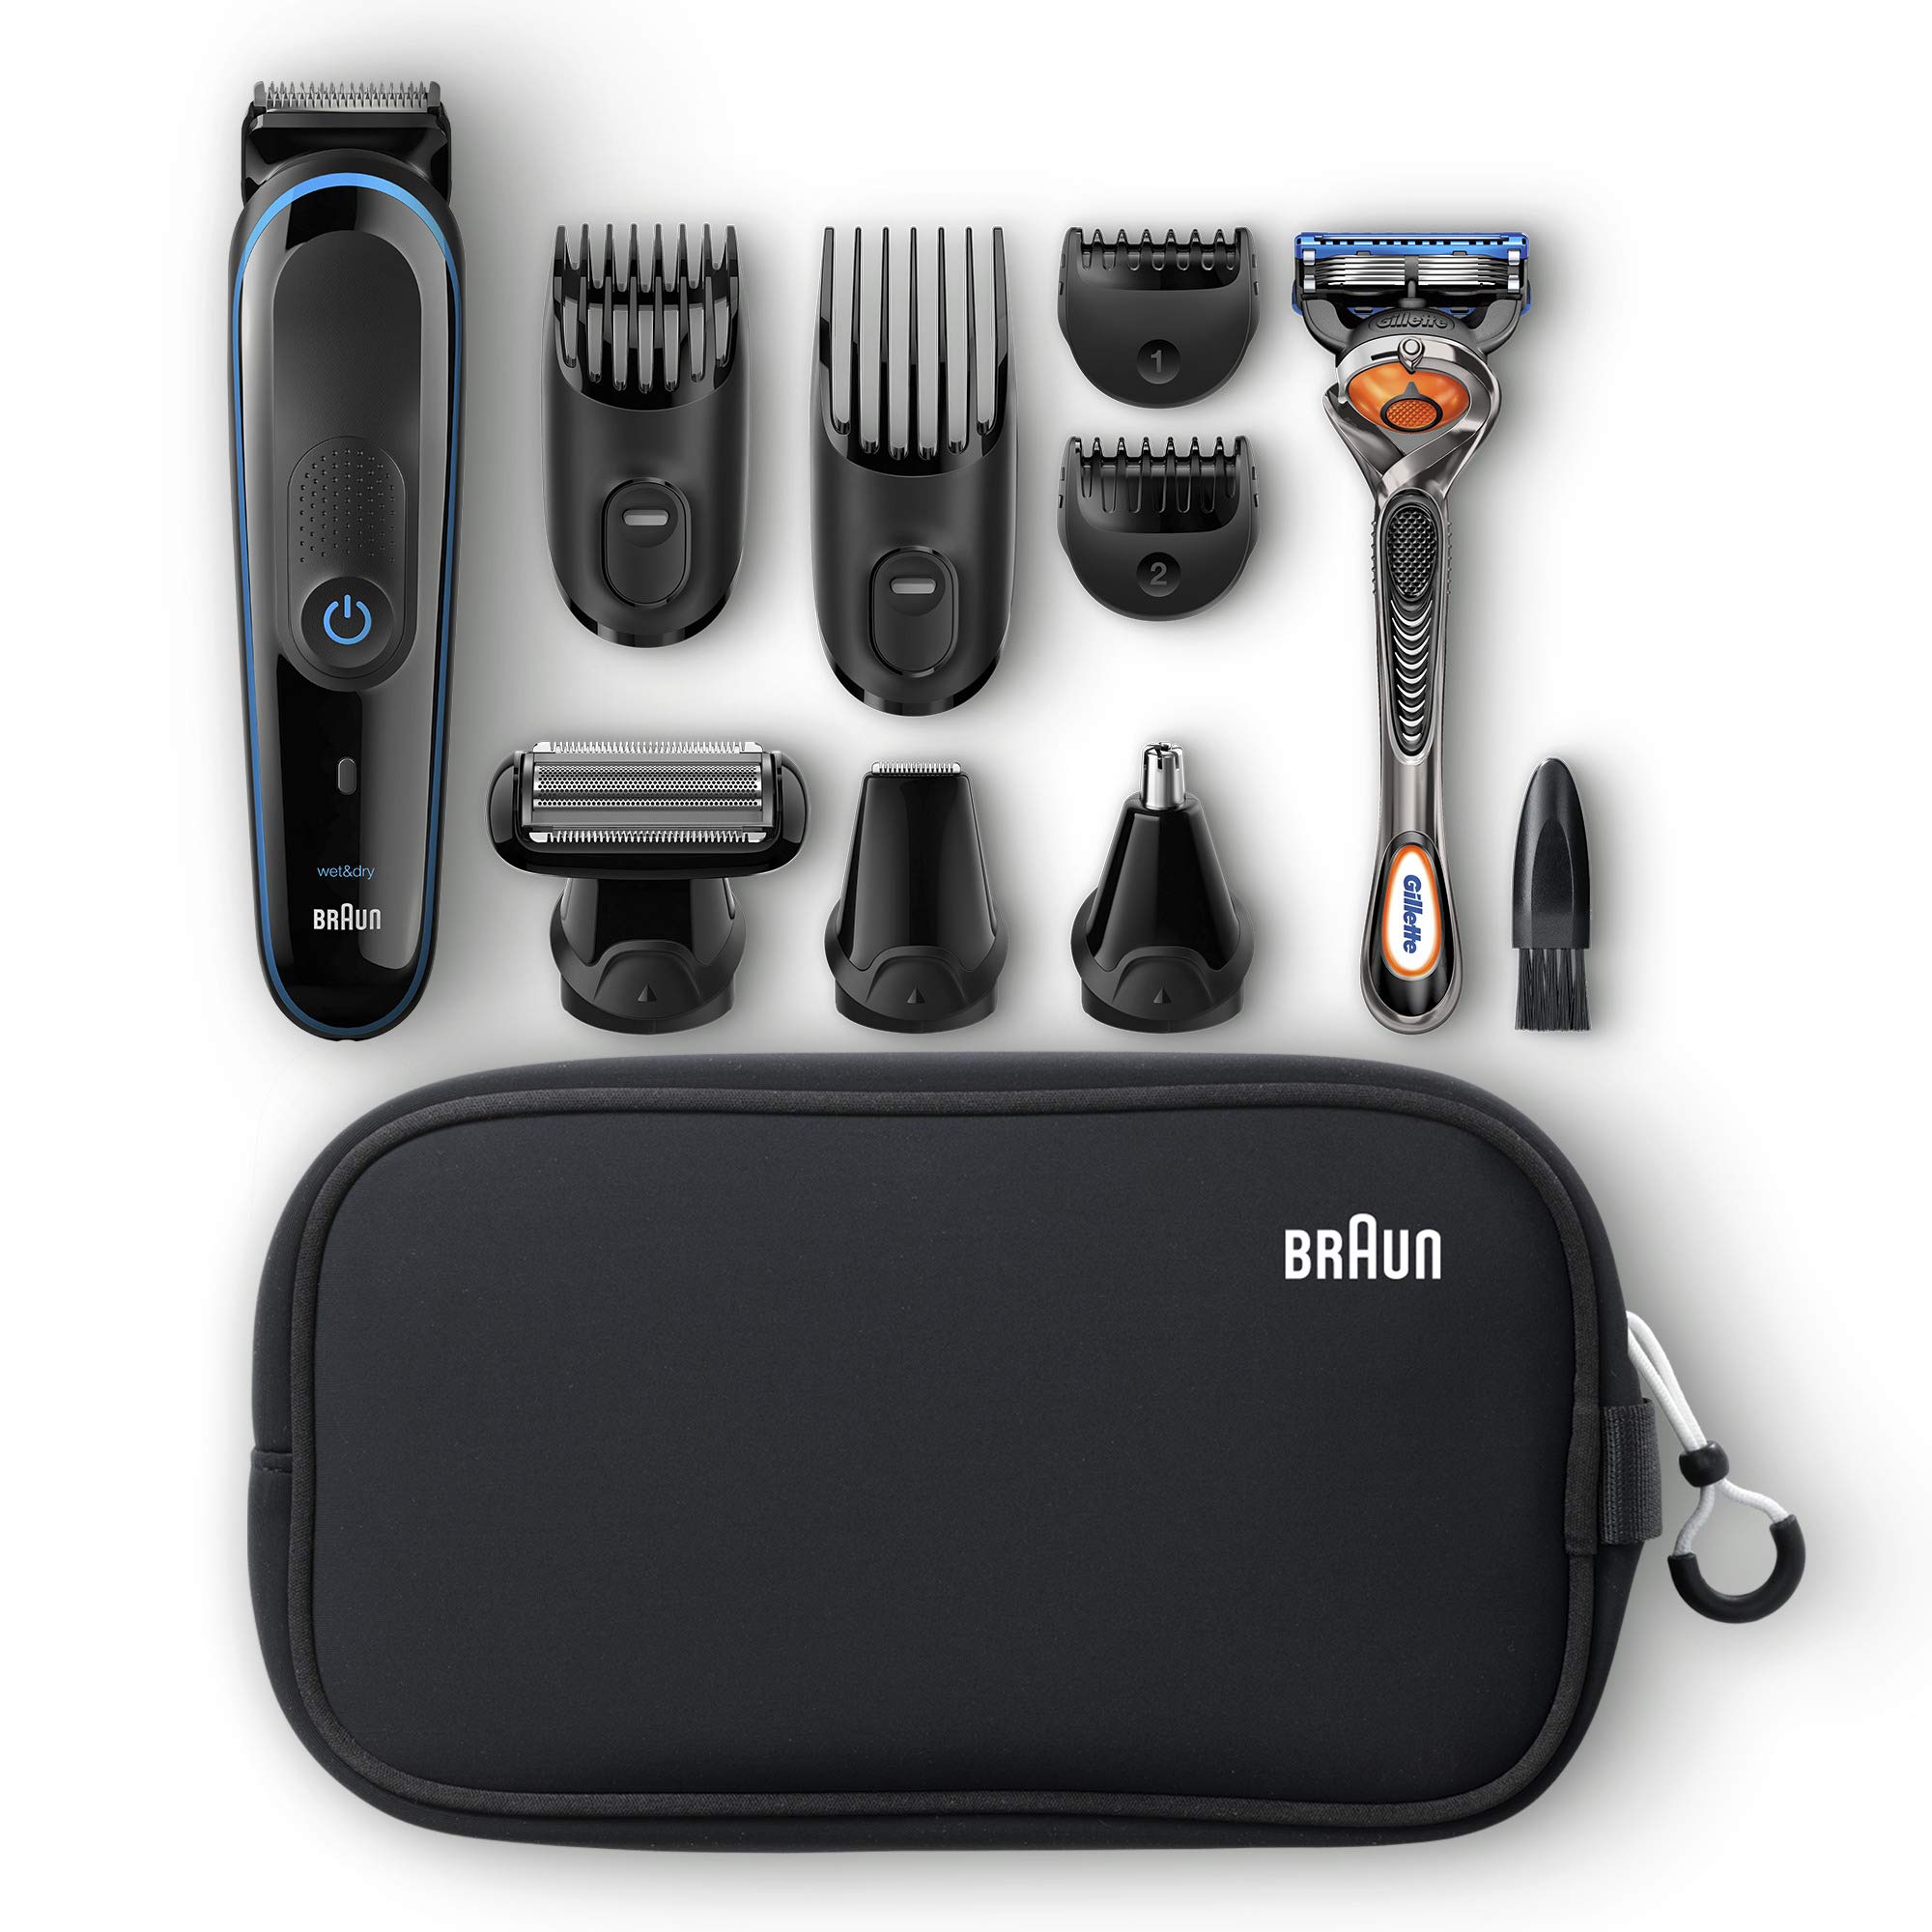 Braun Hair Clippers for Men, 9-in-1 Beard, Ear & Nose Trimmer, Body Grooming Kit, Cordless & Rechargeable with Gillette ProGlide Razor, Black/Blue, 9 Piece Set